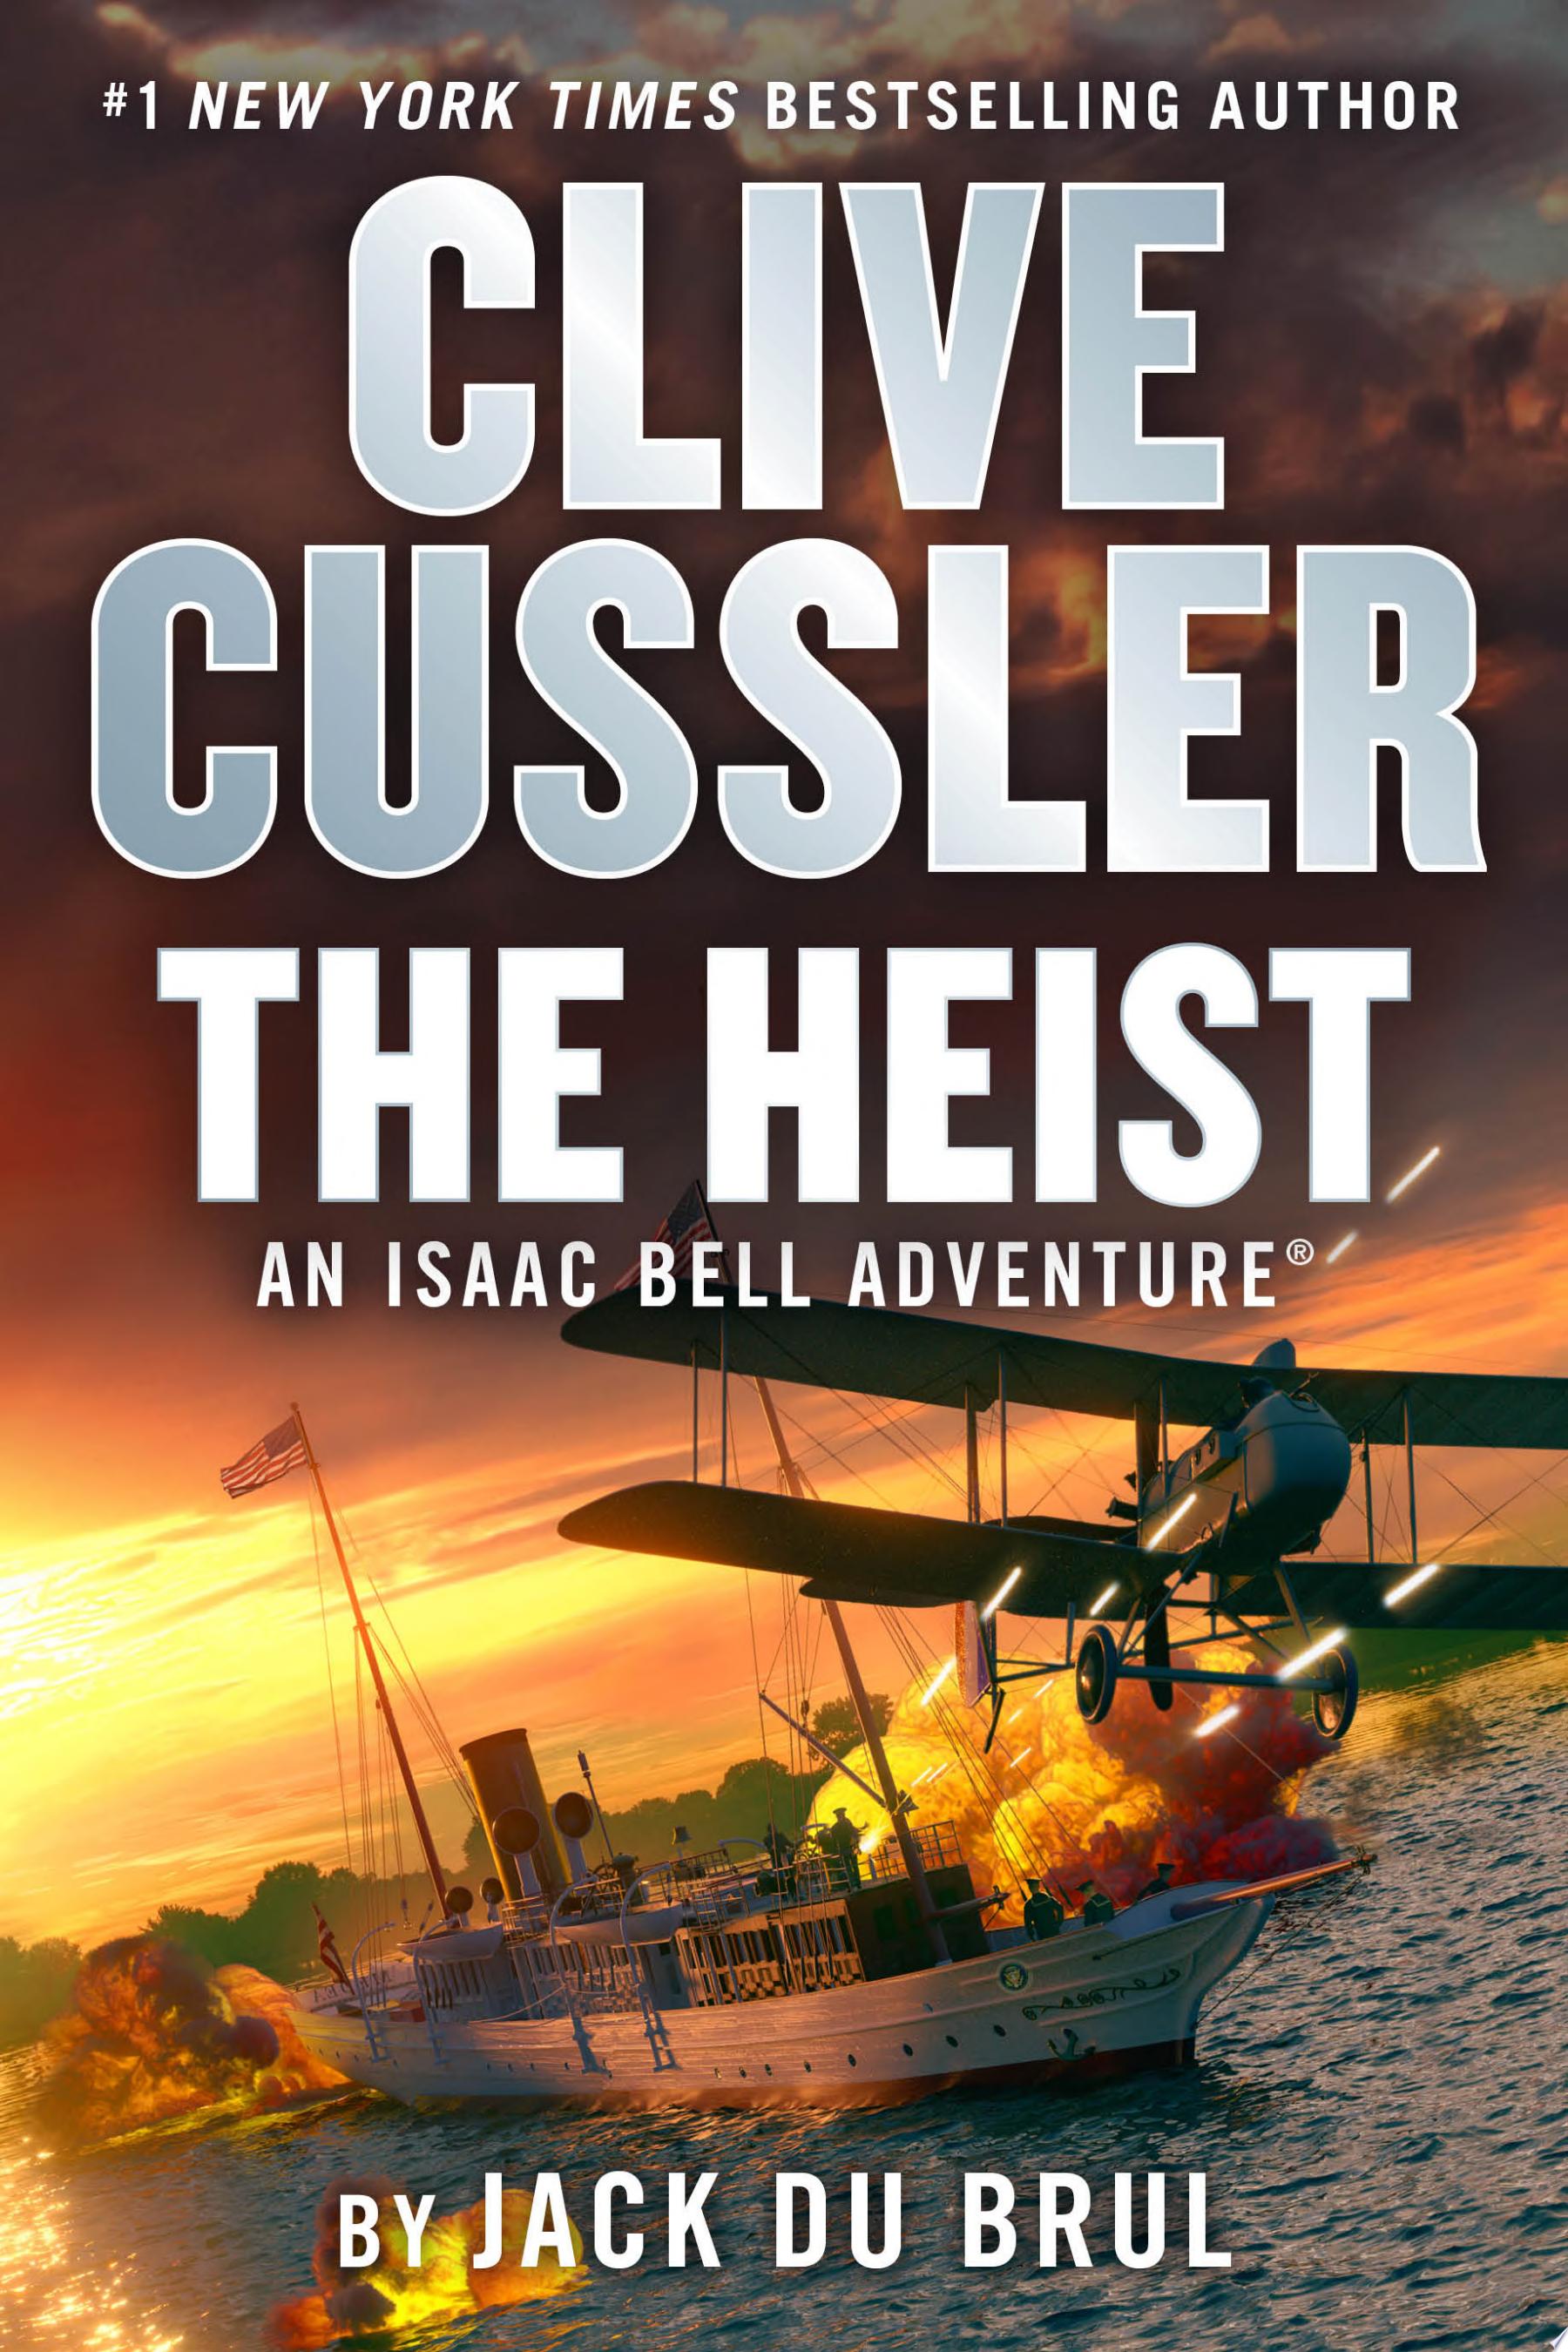 Image for "Clive Cussler The Heist"